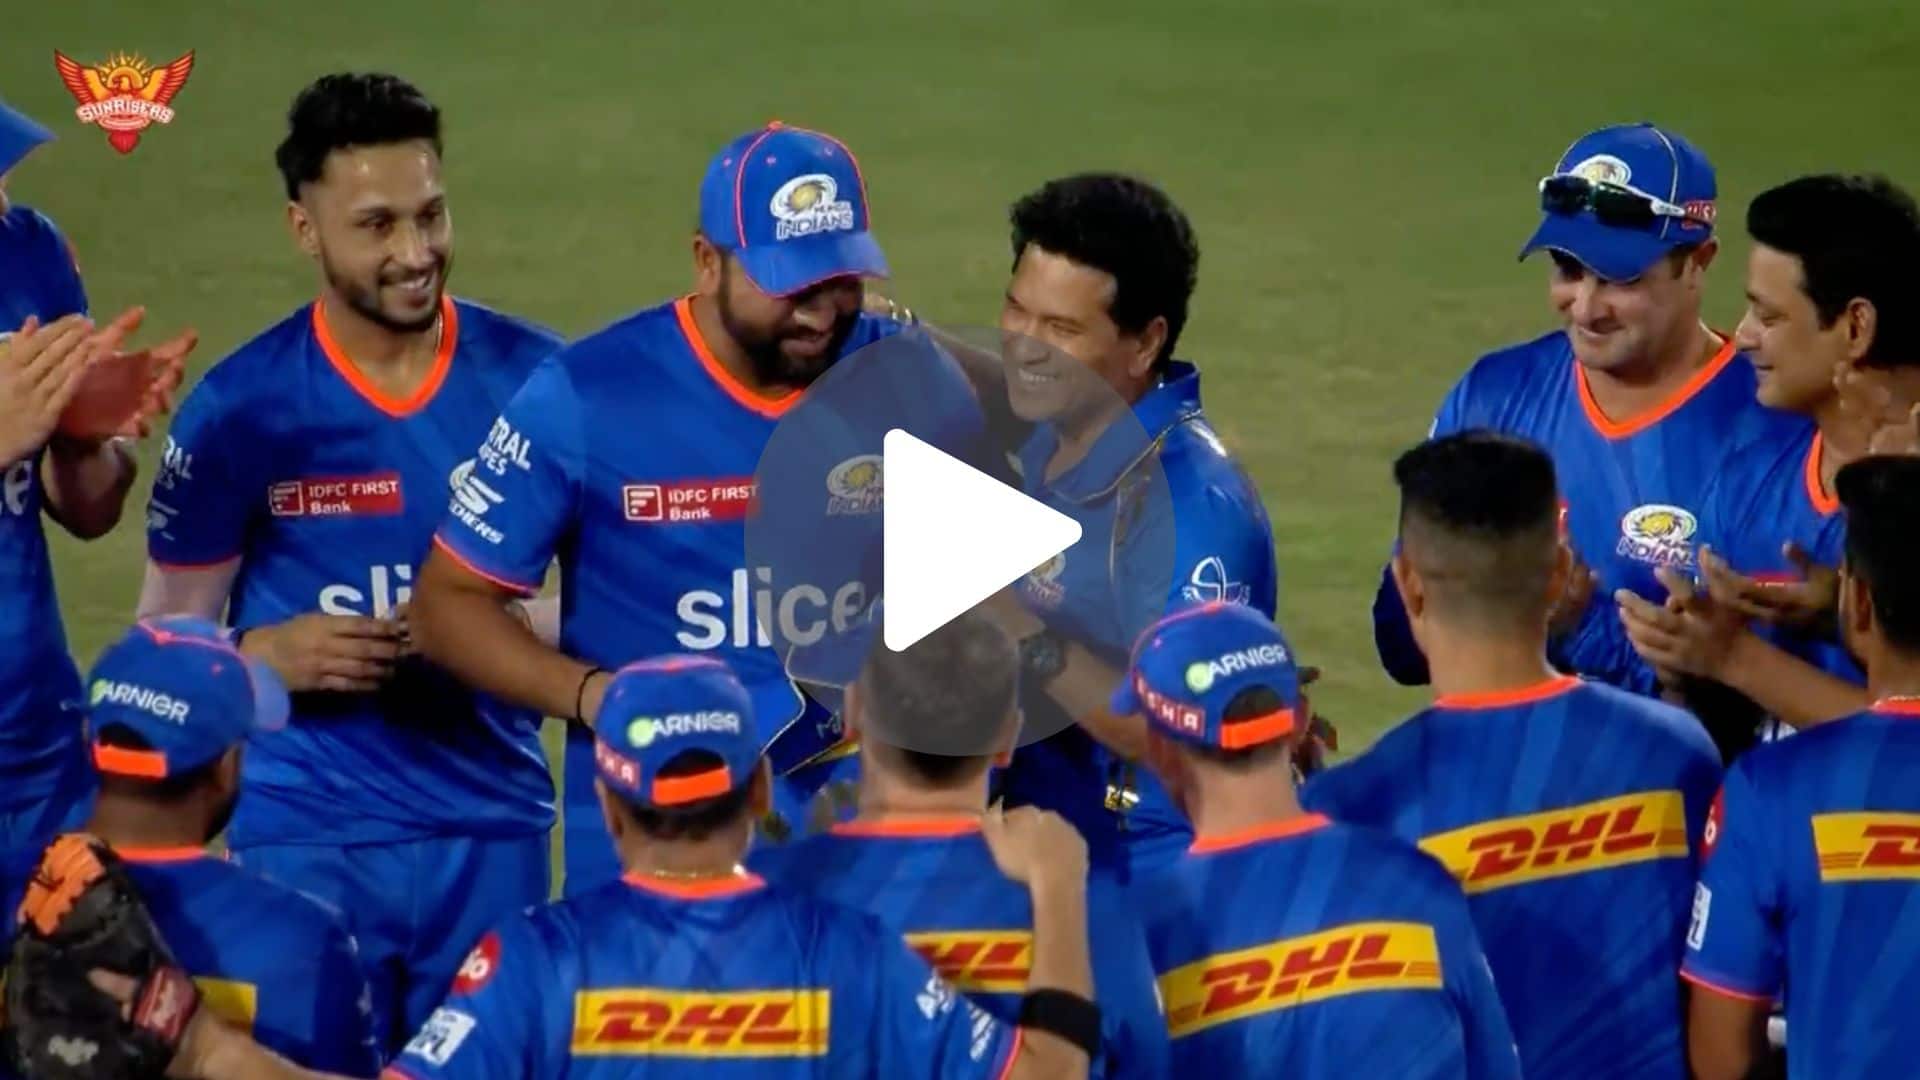 [Watch] Tendulkar Presents Special Jersey To Rohit Sharma On 200th IPL Appearance For MI